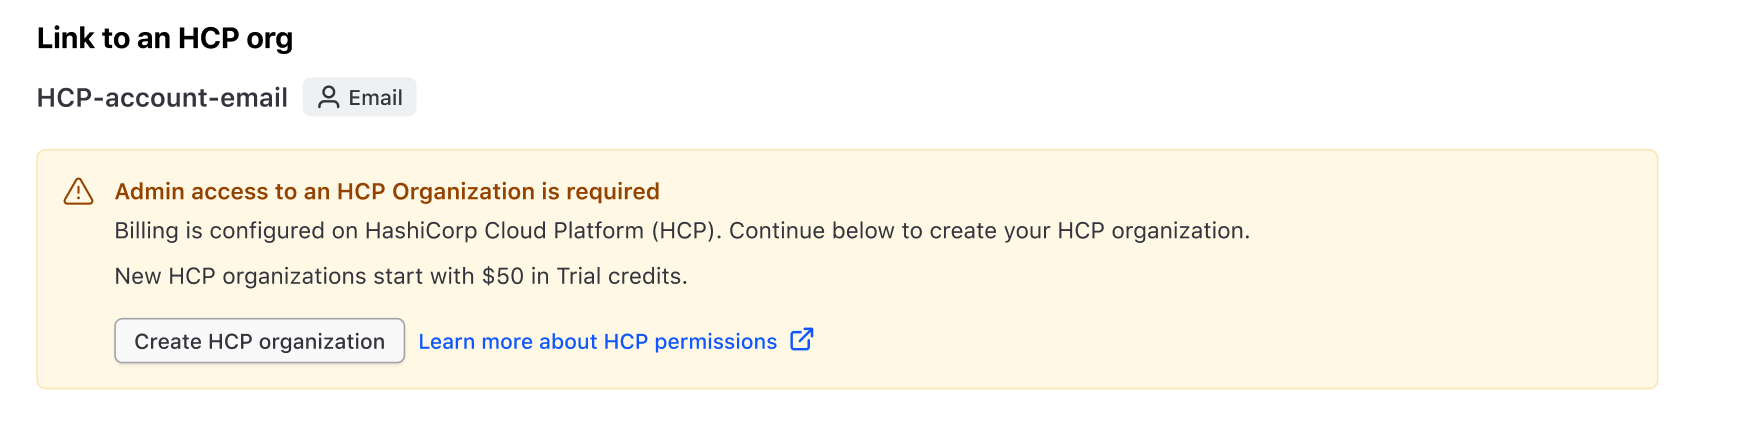 Screenshot: Create and link to HCP organization interface